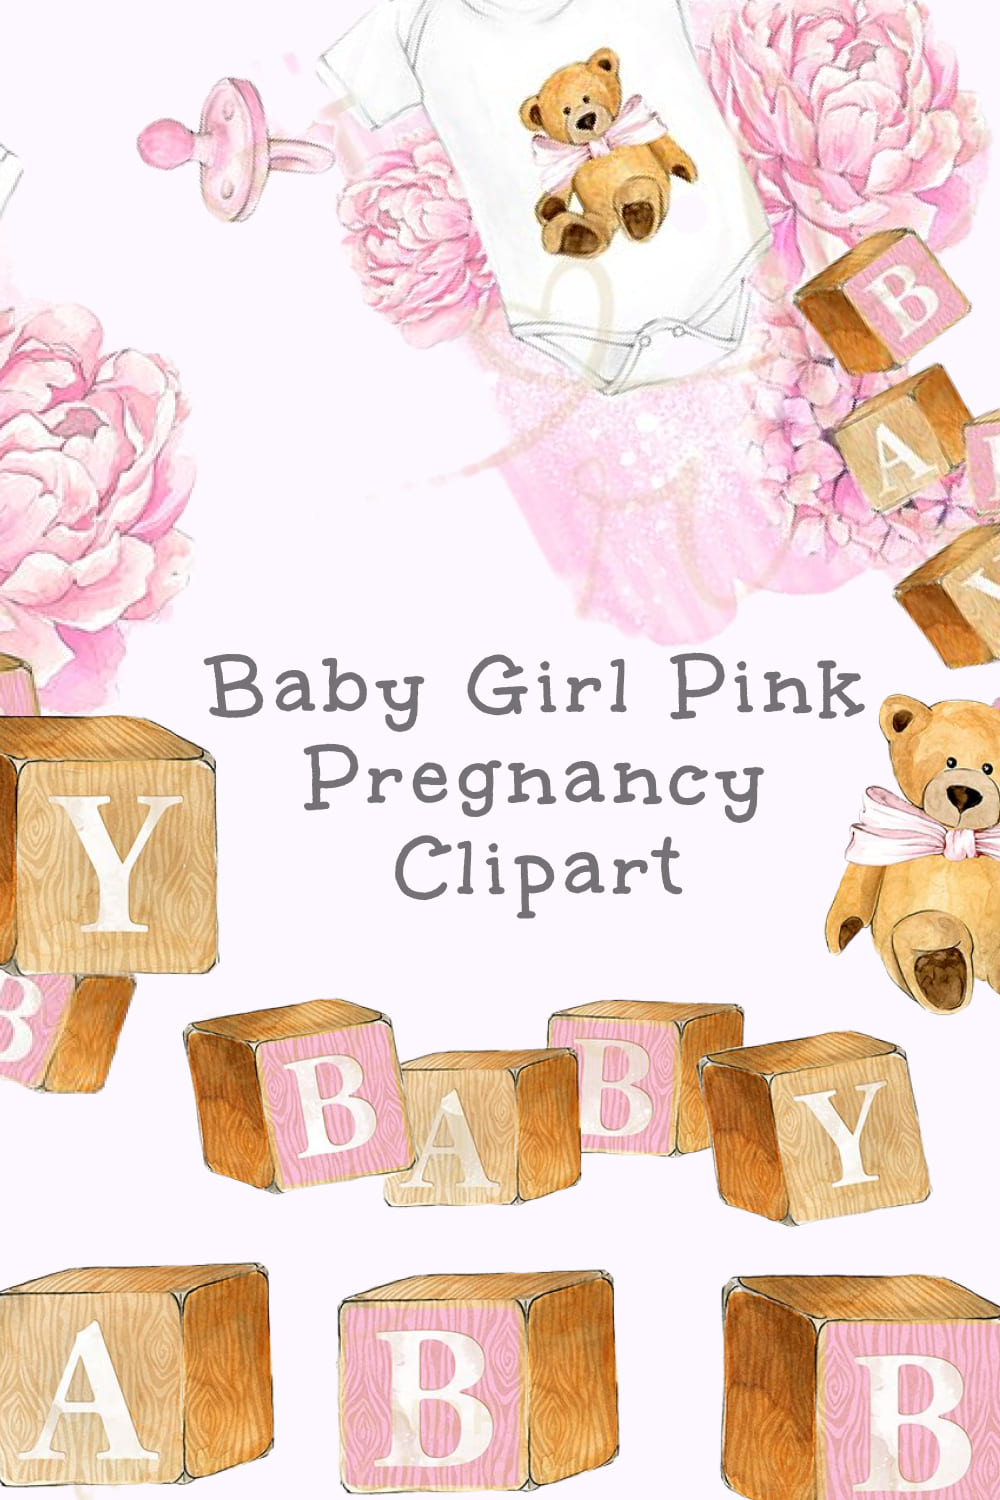 Baby Girl Pink Pregnancy Clipart - Pinterest Image Preview.